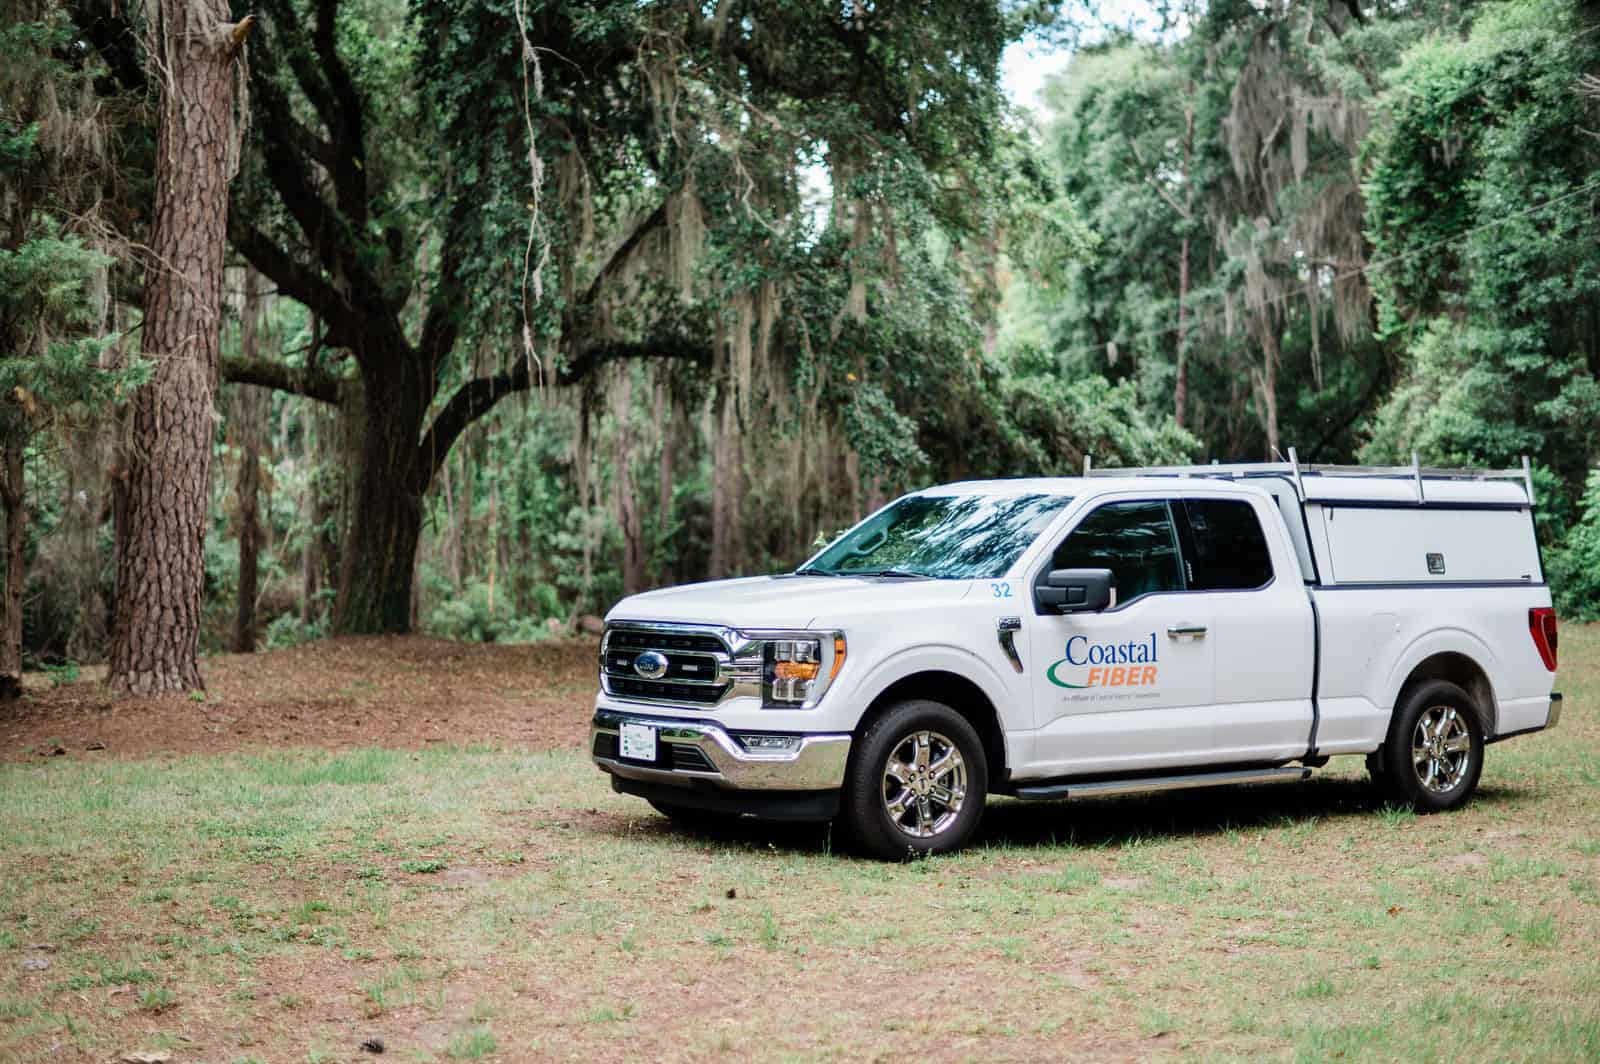 White Coastal Fiber service truck with local marsh and pier in the background.